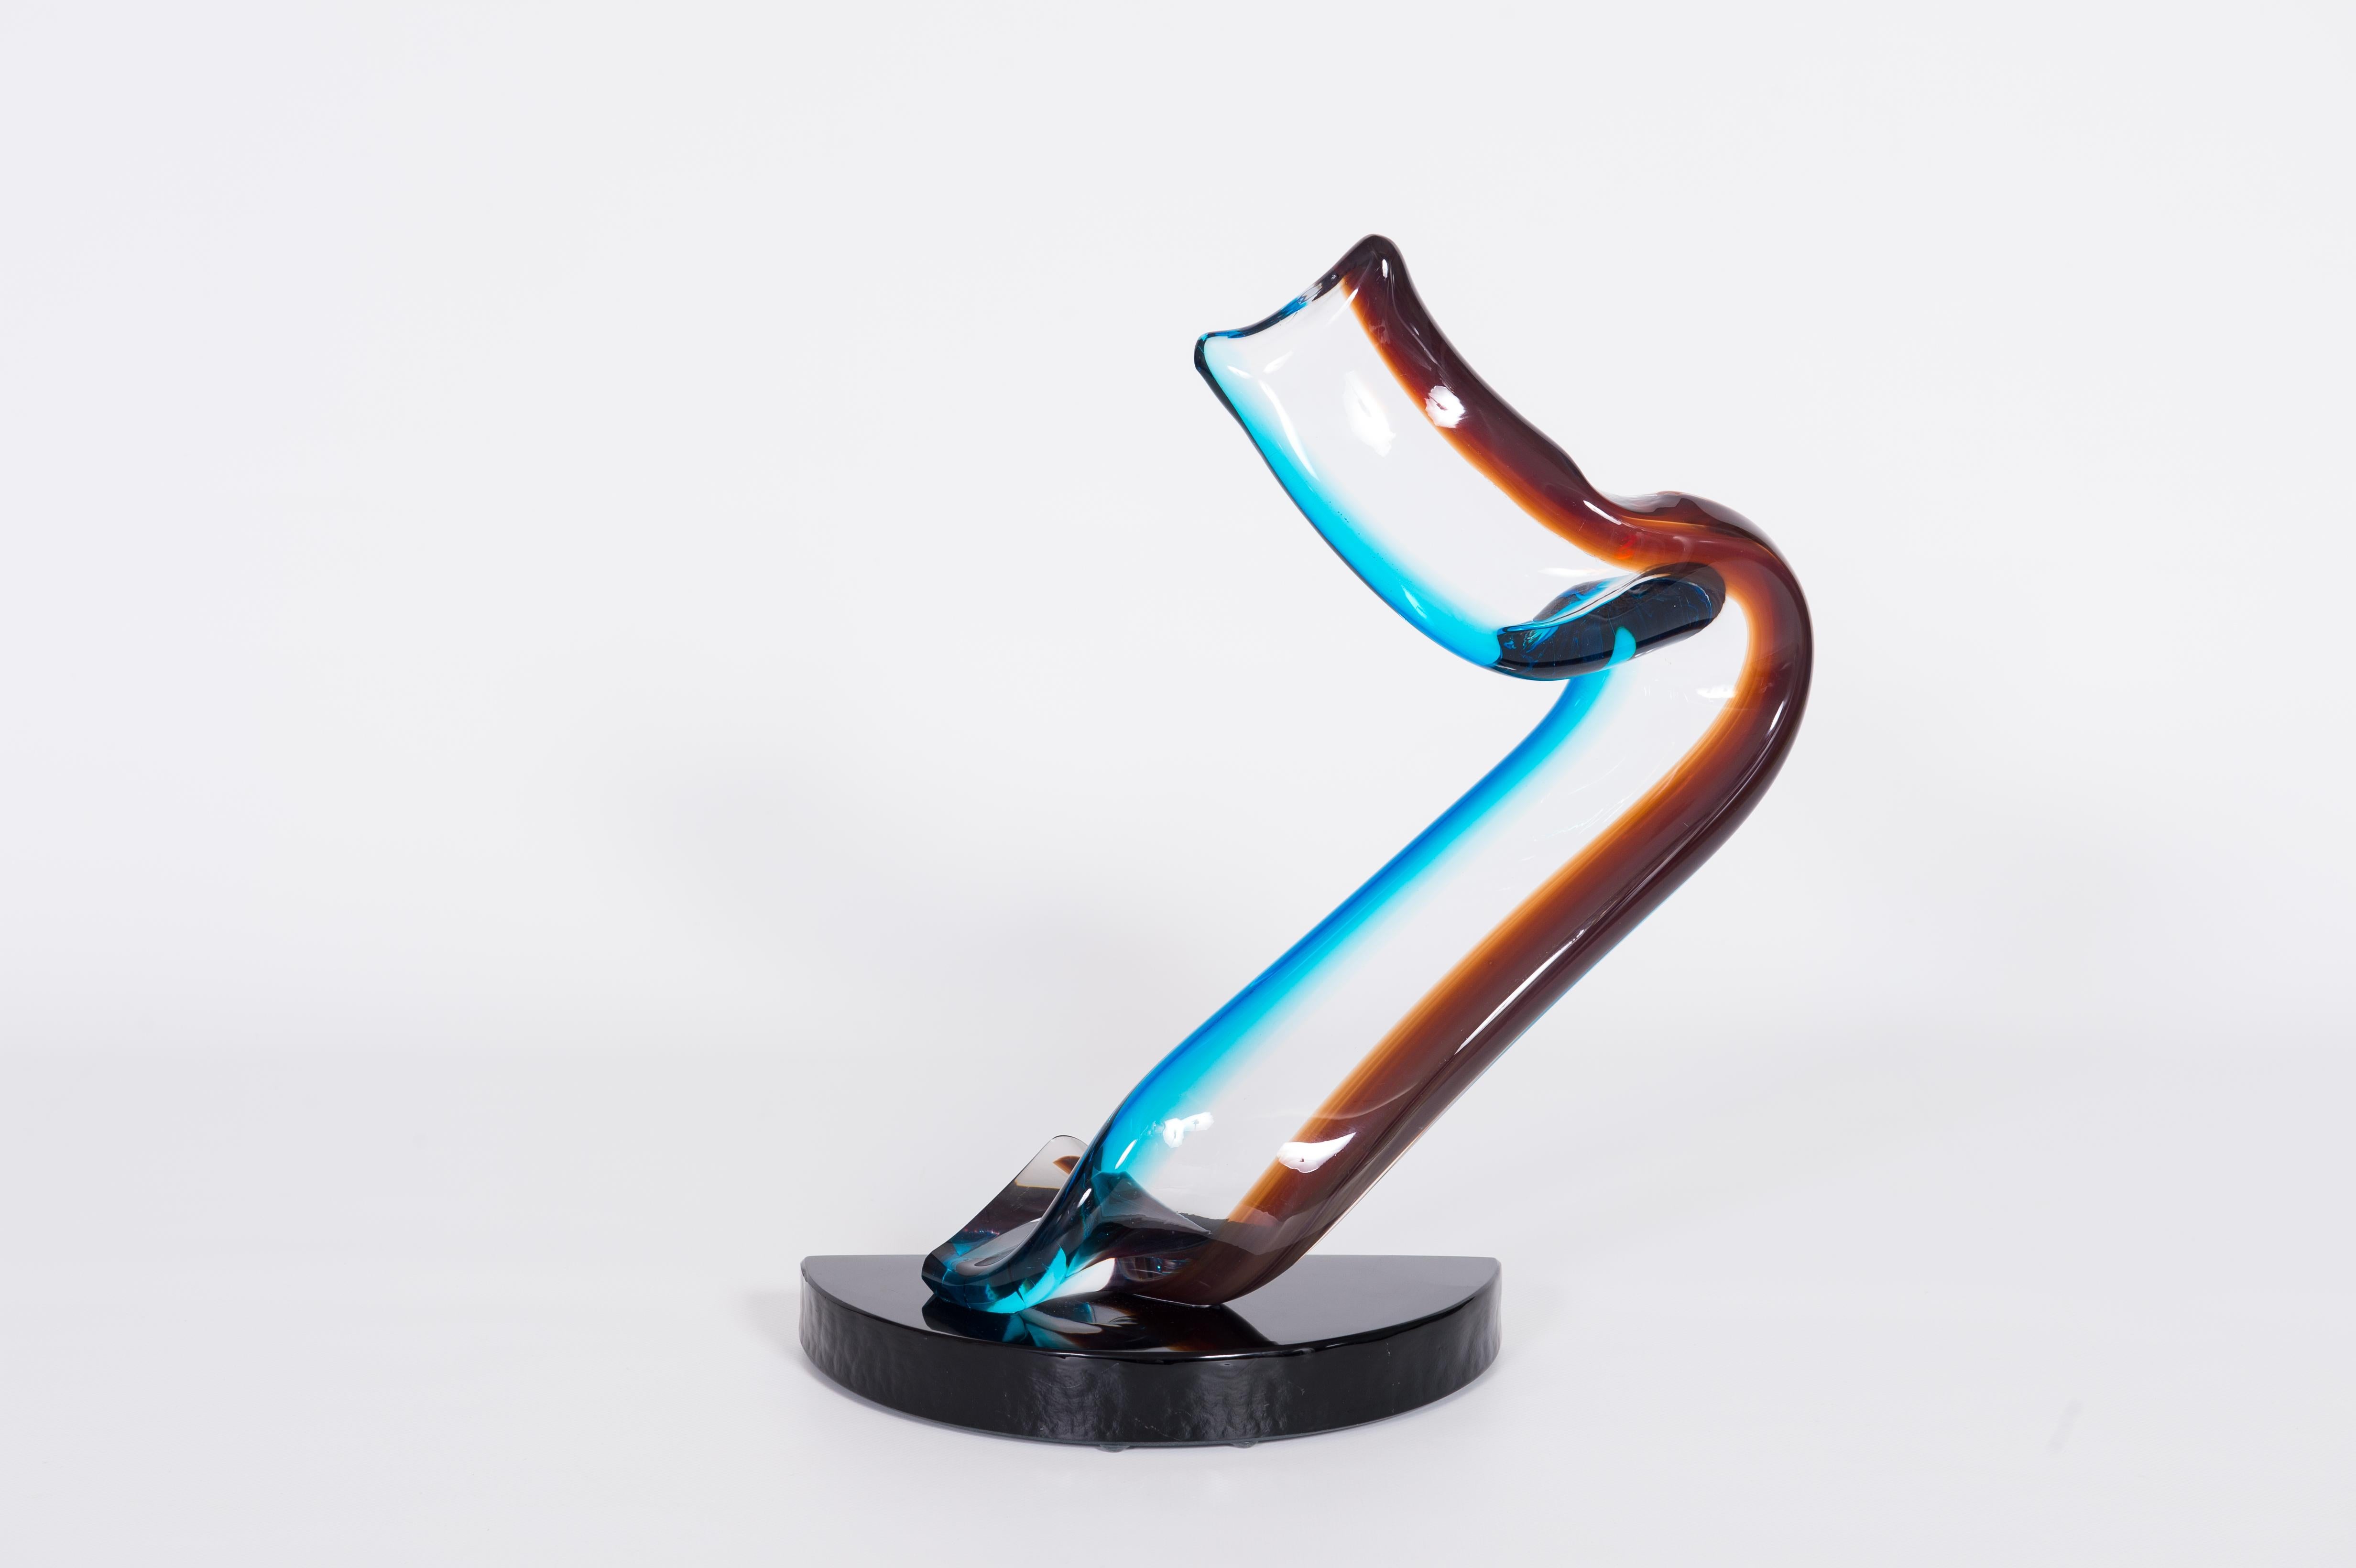 Refined Furkel Sculpture in sunken Multicolor Finishes in Murano Glass, Italy.
This incredible Italian Venetian sculpture is truly unique, and stands out for its enchanting shape and its colors. This piece of art is made of transparent Murano glass